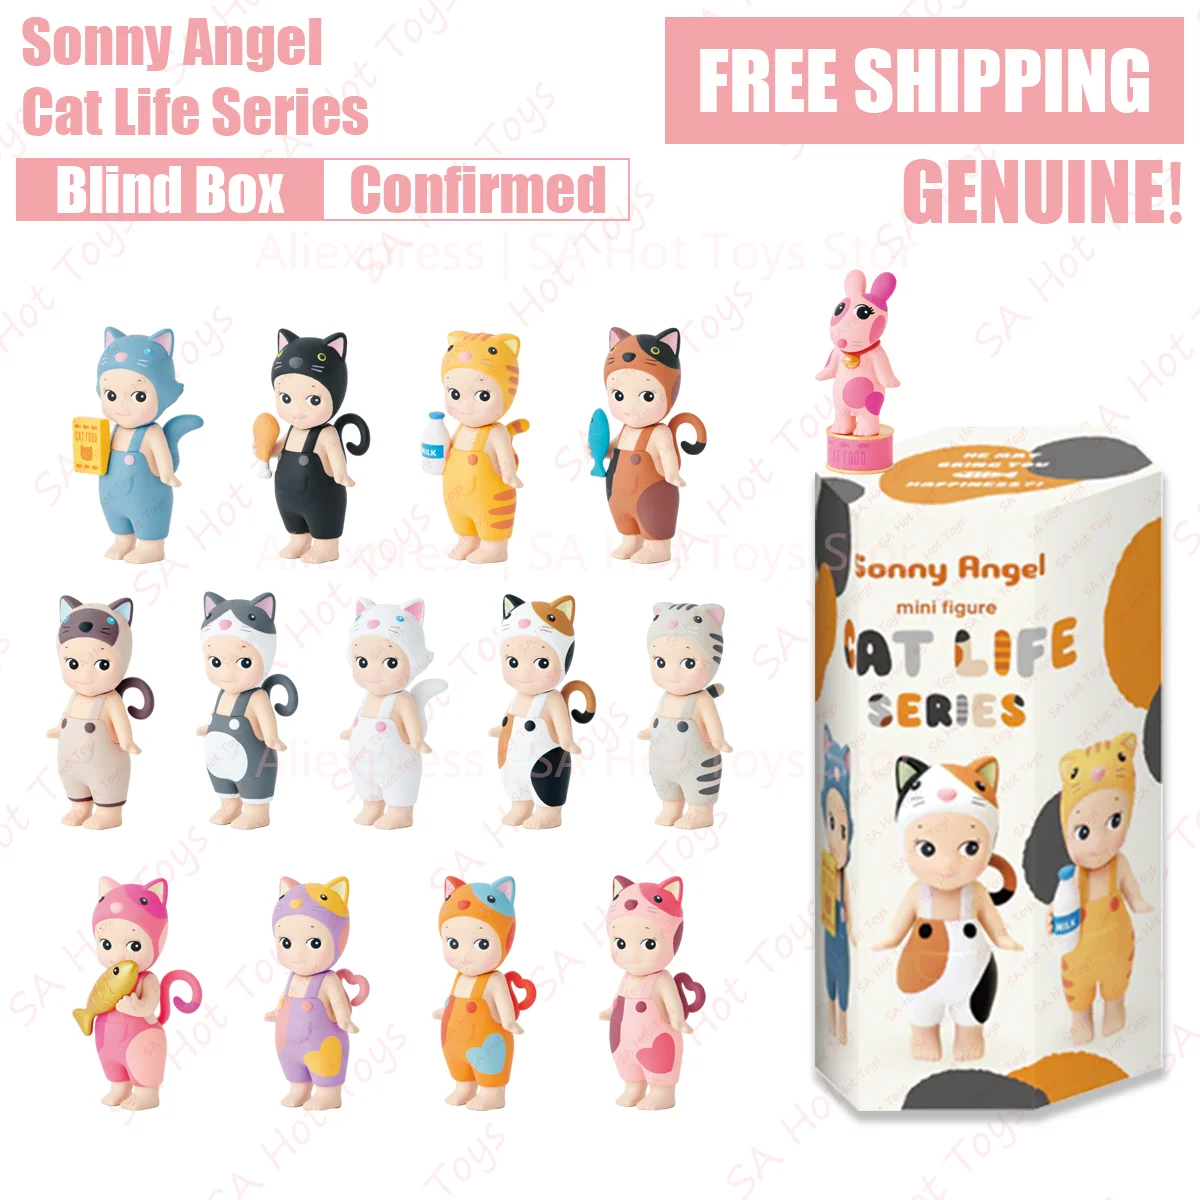 Sonny Angel Cat Life Blind Box Confirmed style Genuine Cute Doll telephone - $48.87+